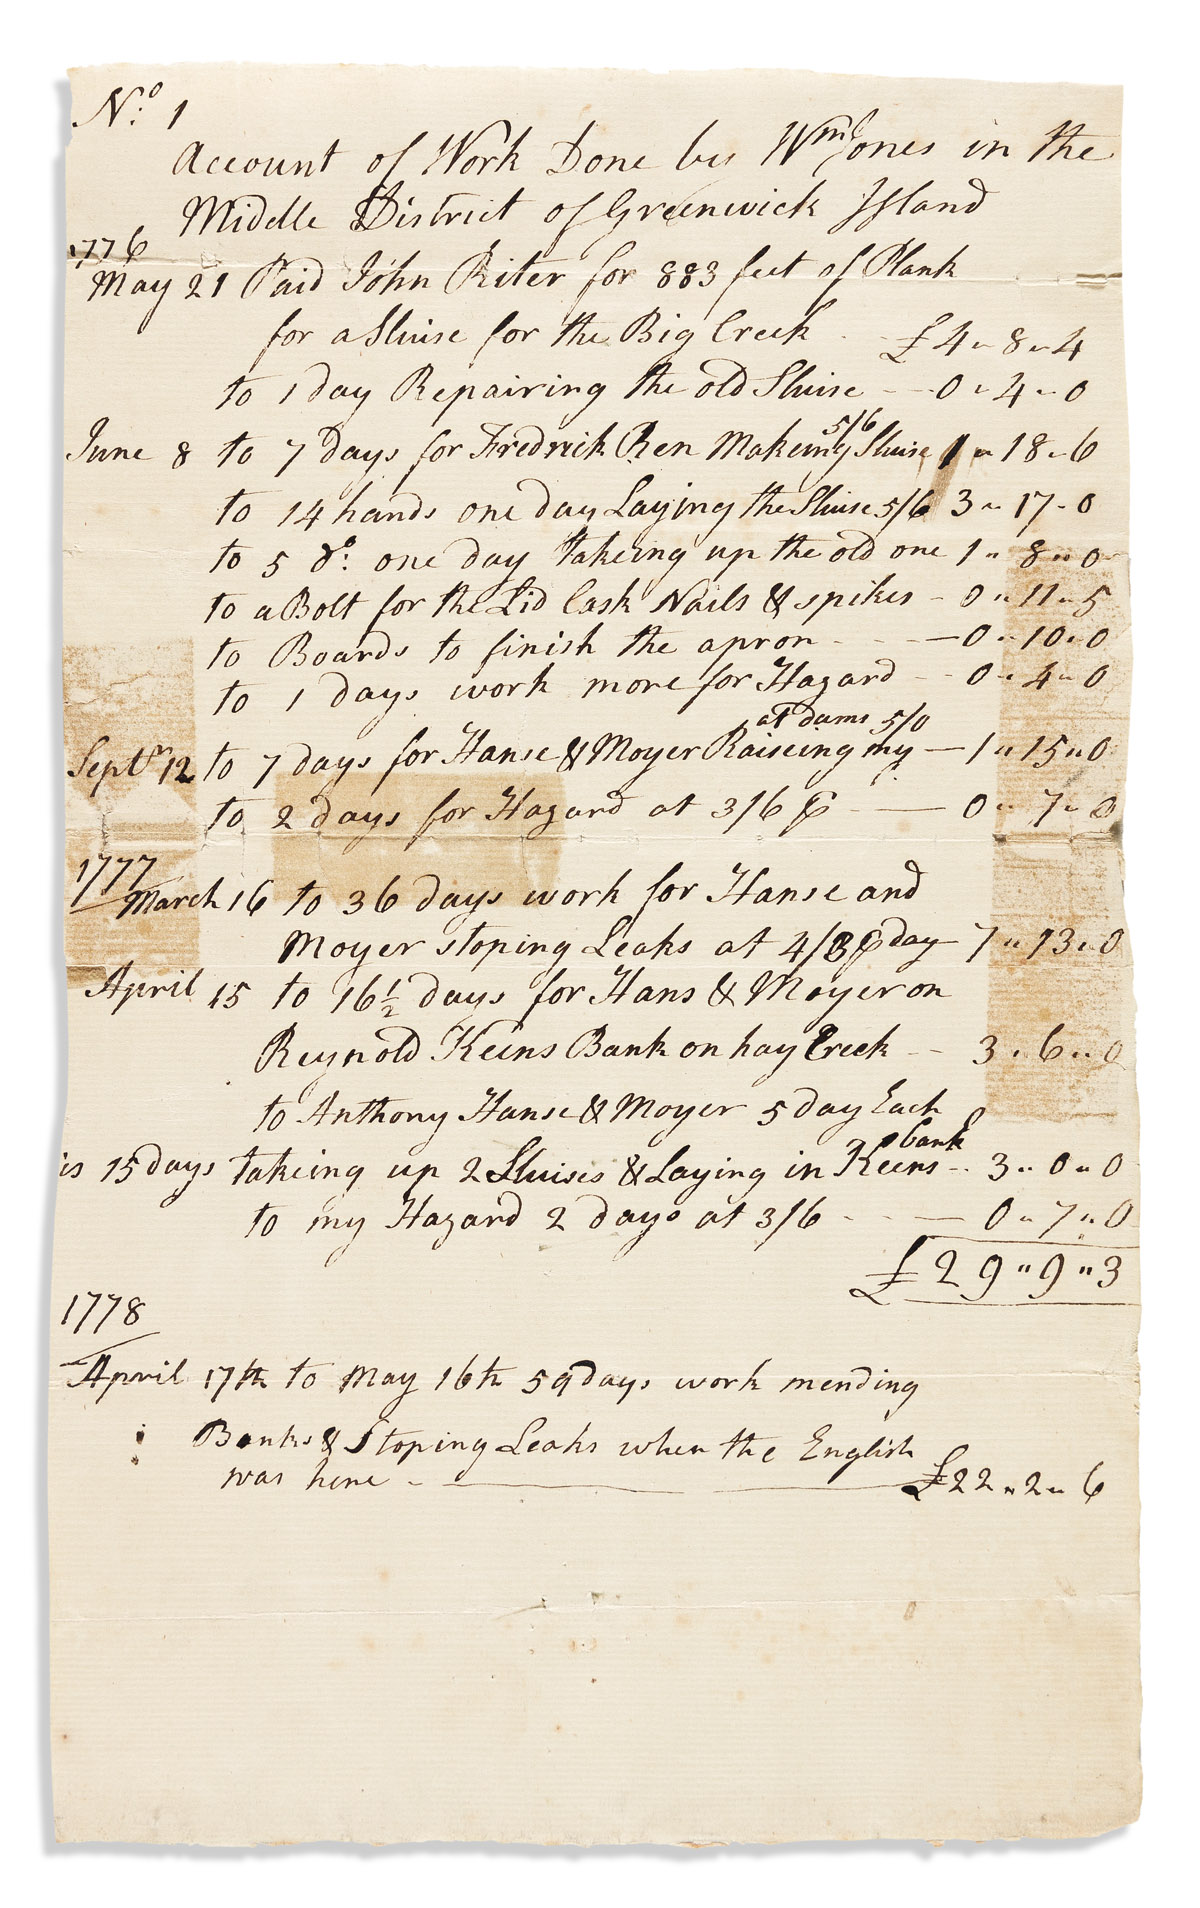 (AMERICAN REVOLUTION--1778.) Bill for maintenance on Philadelphias wetlands when the English was here.